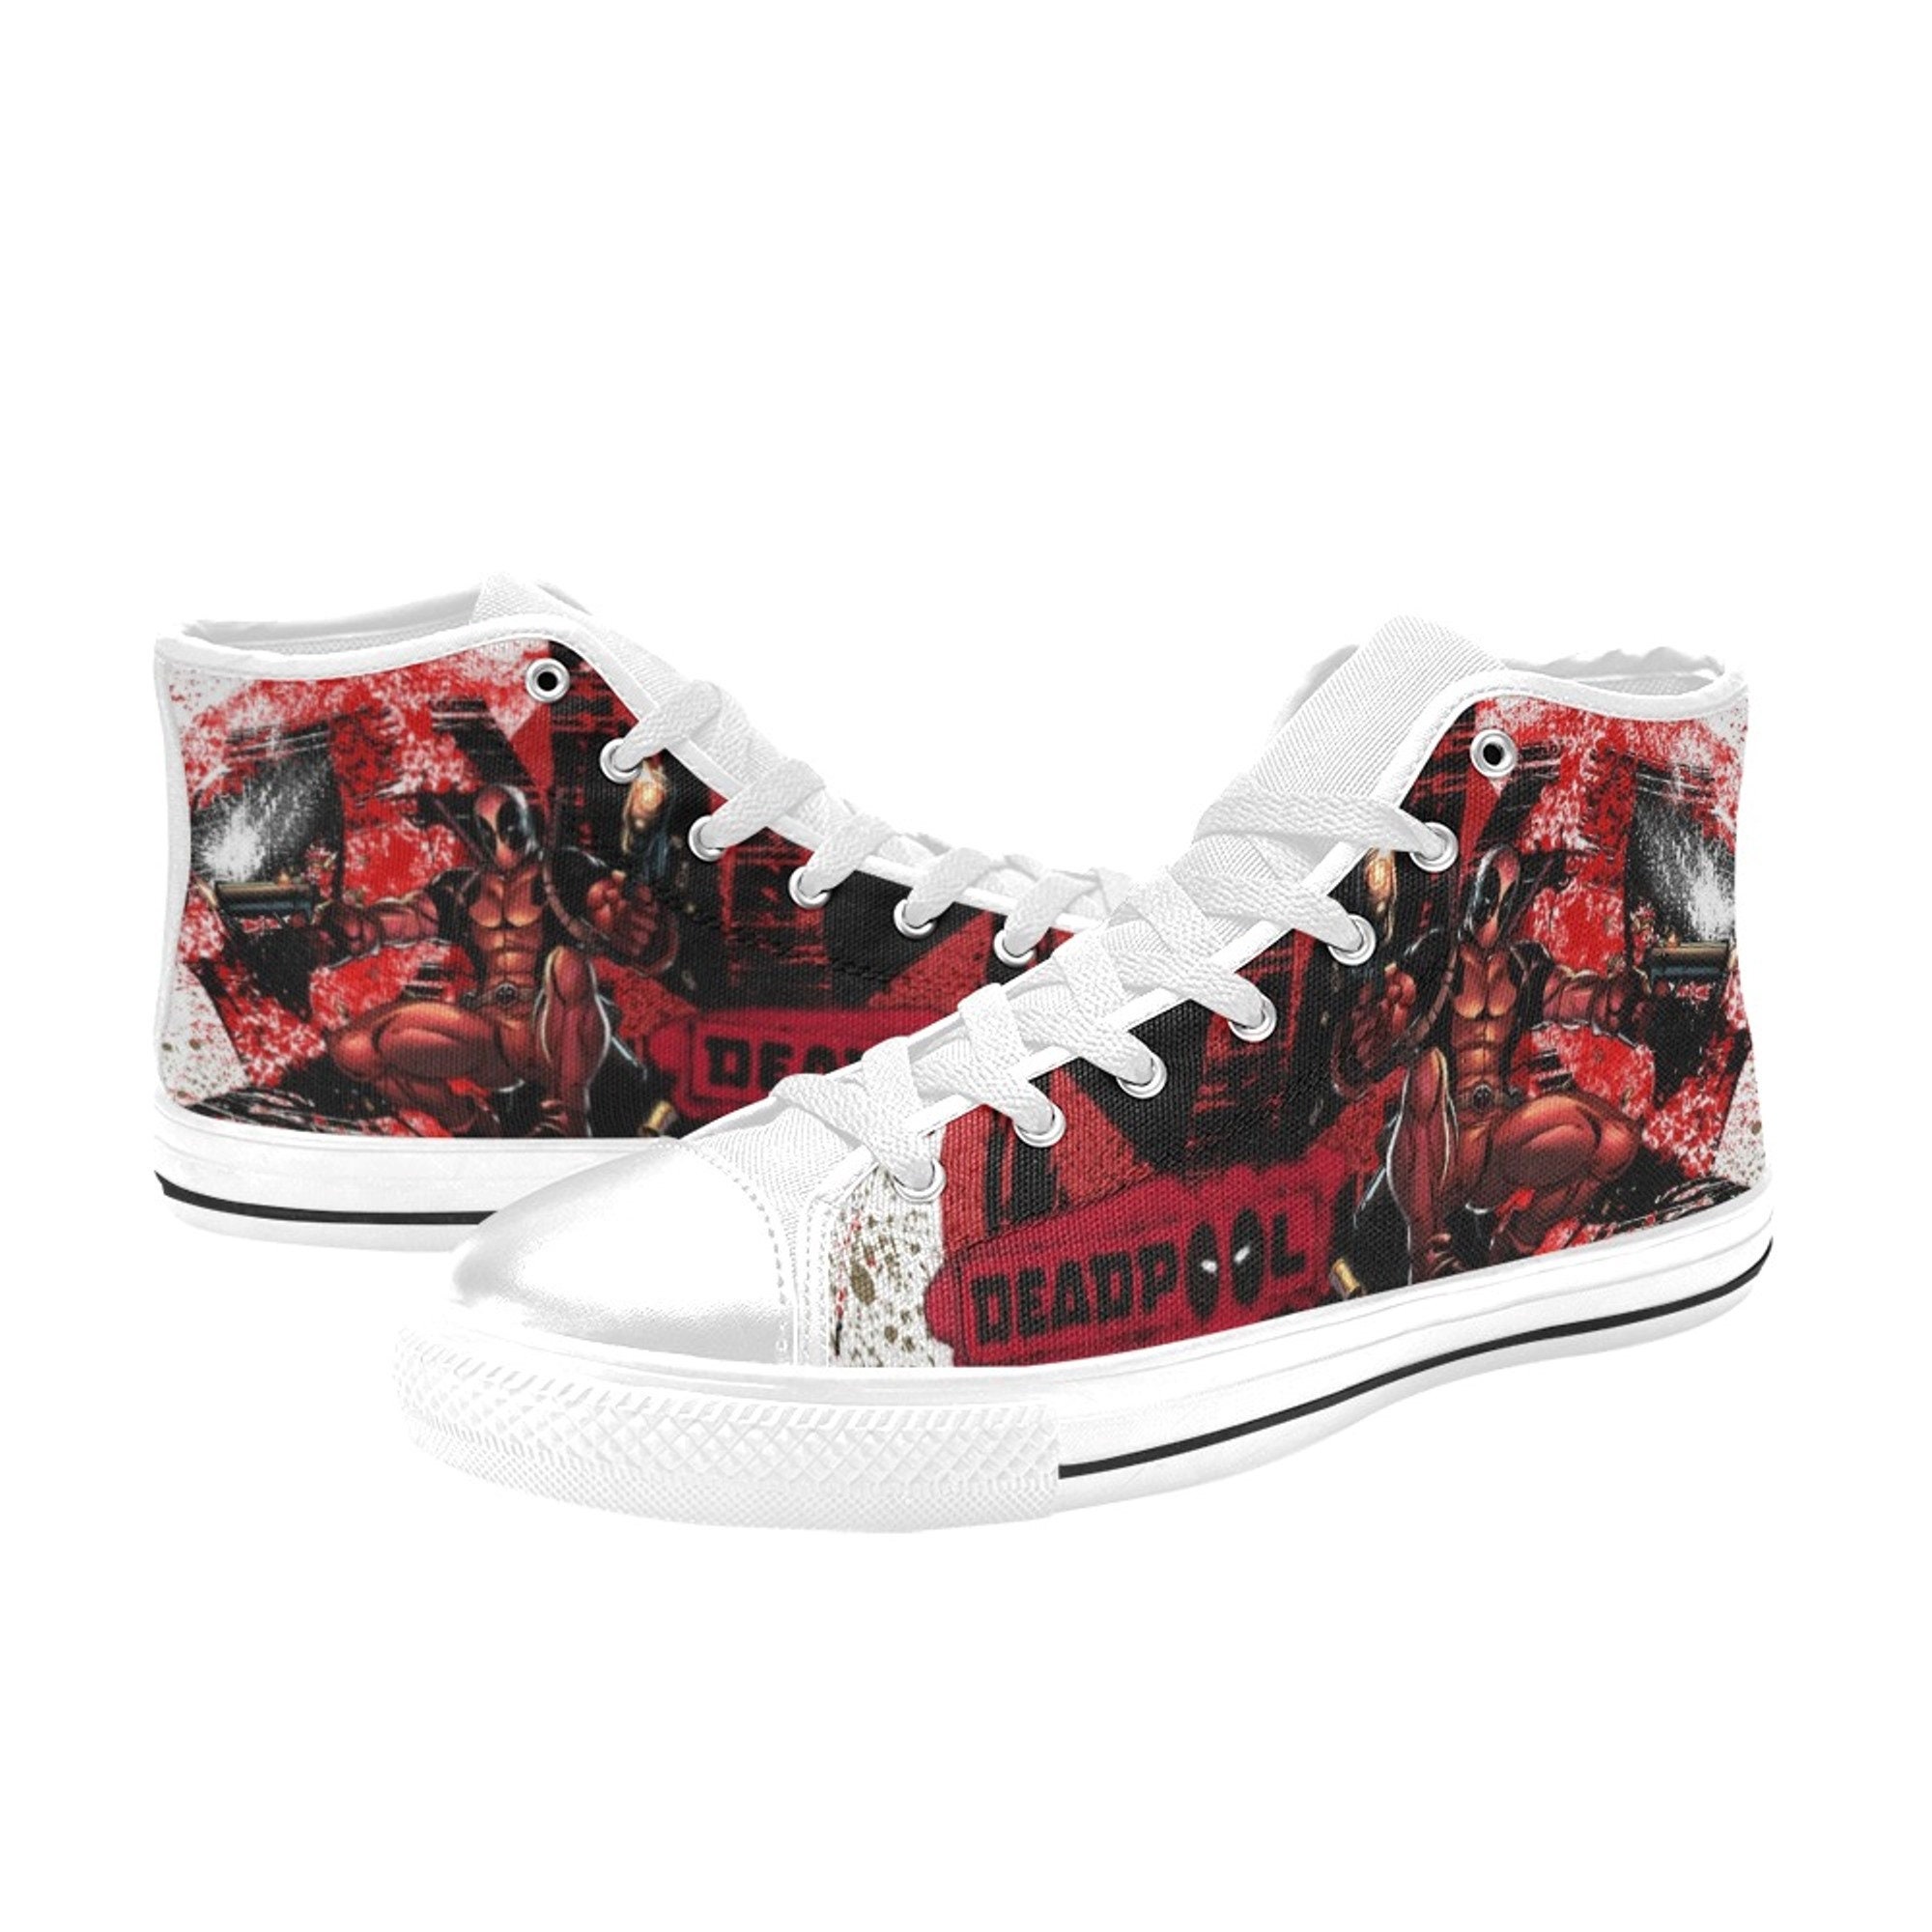 Deadpool High Top Shoes, Custom Unisex Kids and Adult Shoes